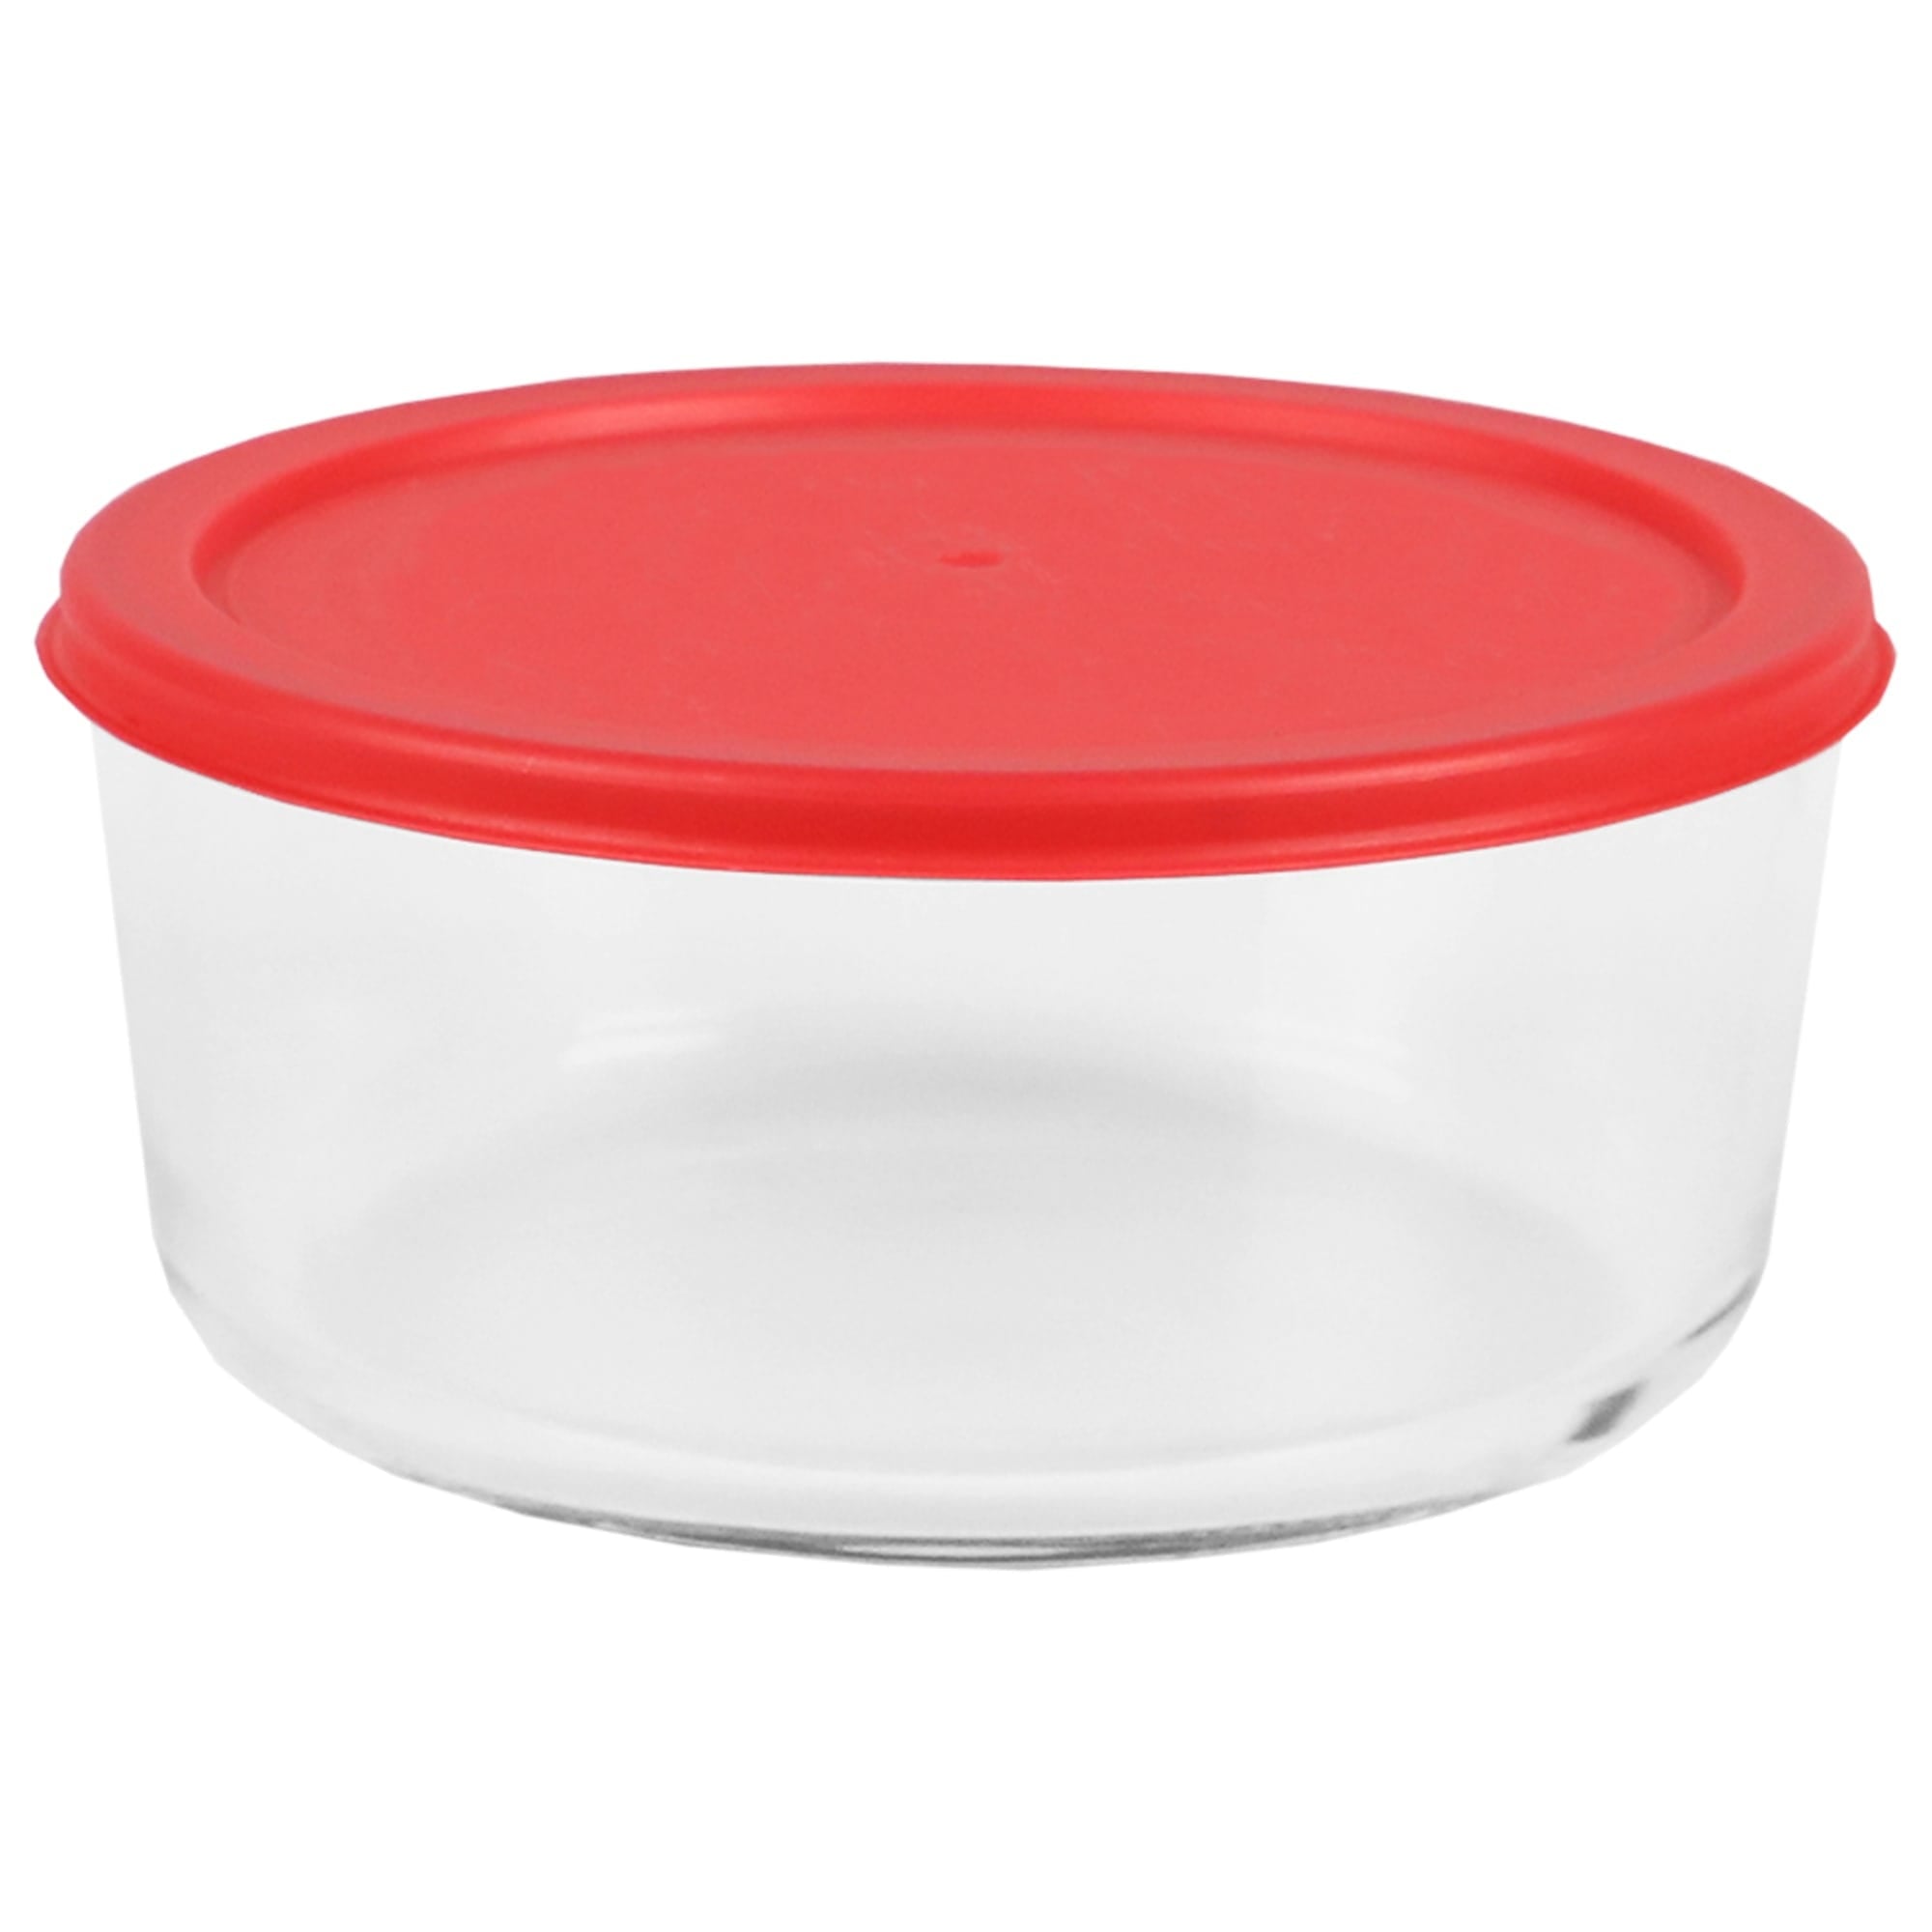 Home Basics Round 55 oz. Glass Food Storage Container with Red Lid, Clear $5.00 EACH, CASE PACK OF 12